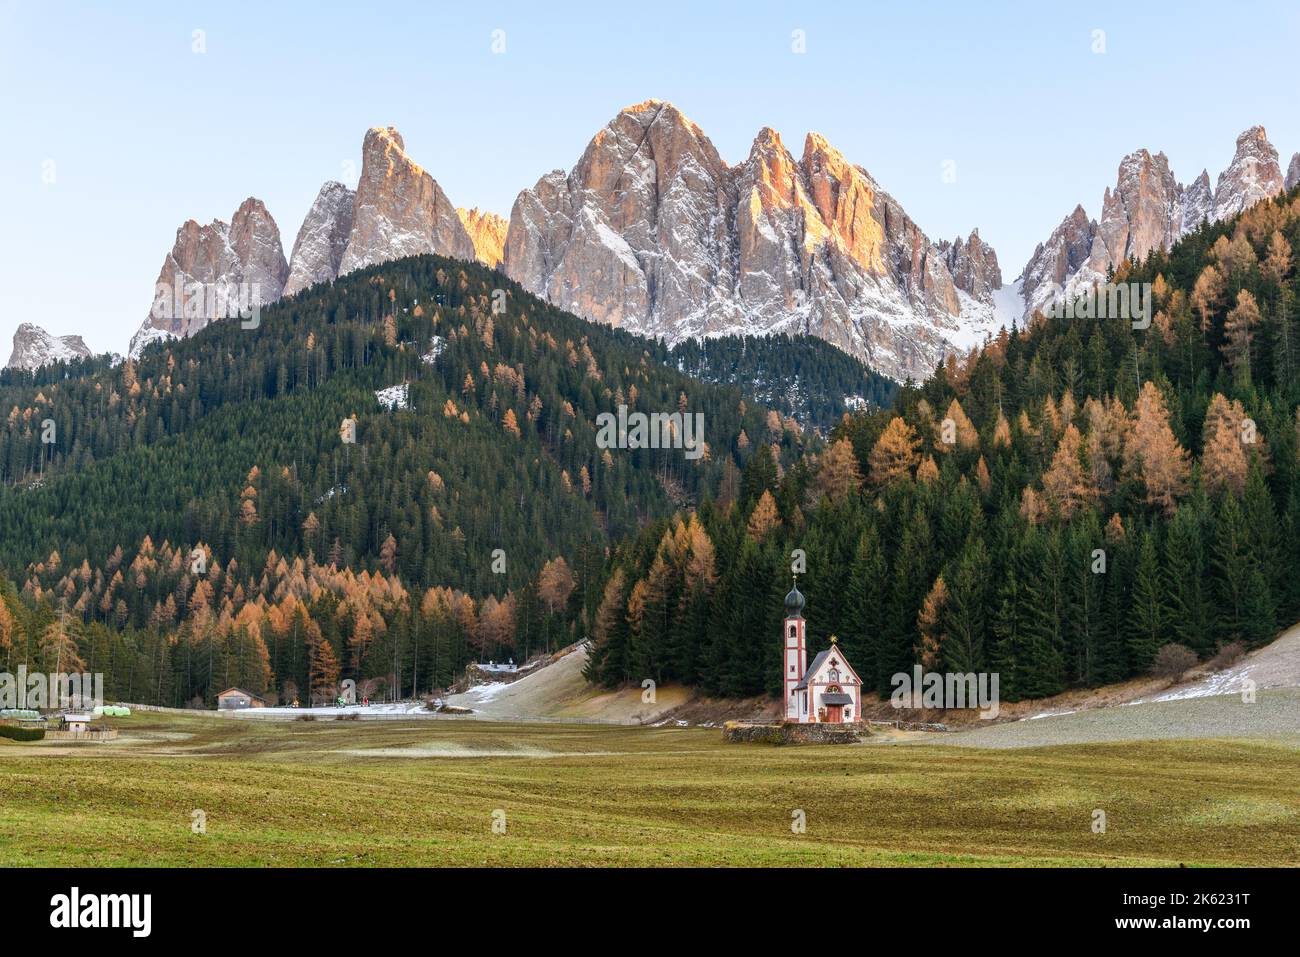 Autumnal sunset in the Dolomites. A lonely small church stands in the middle of a meadow at the foot of towering peaks. Stock Photo